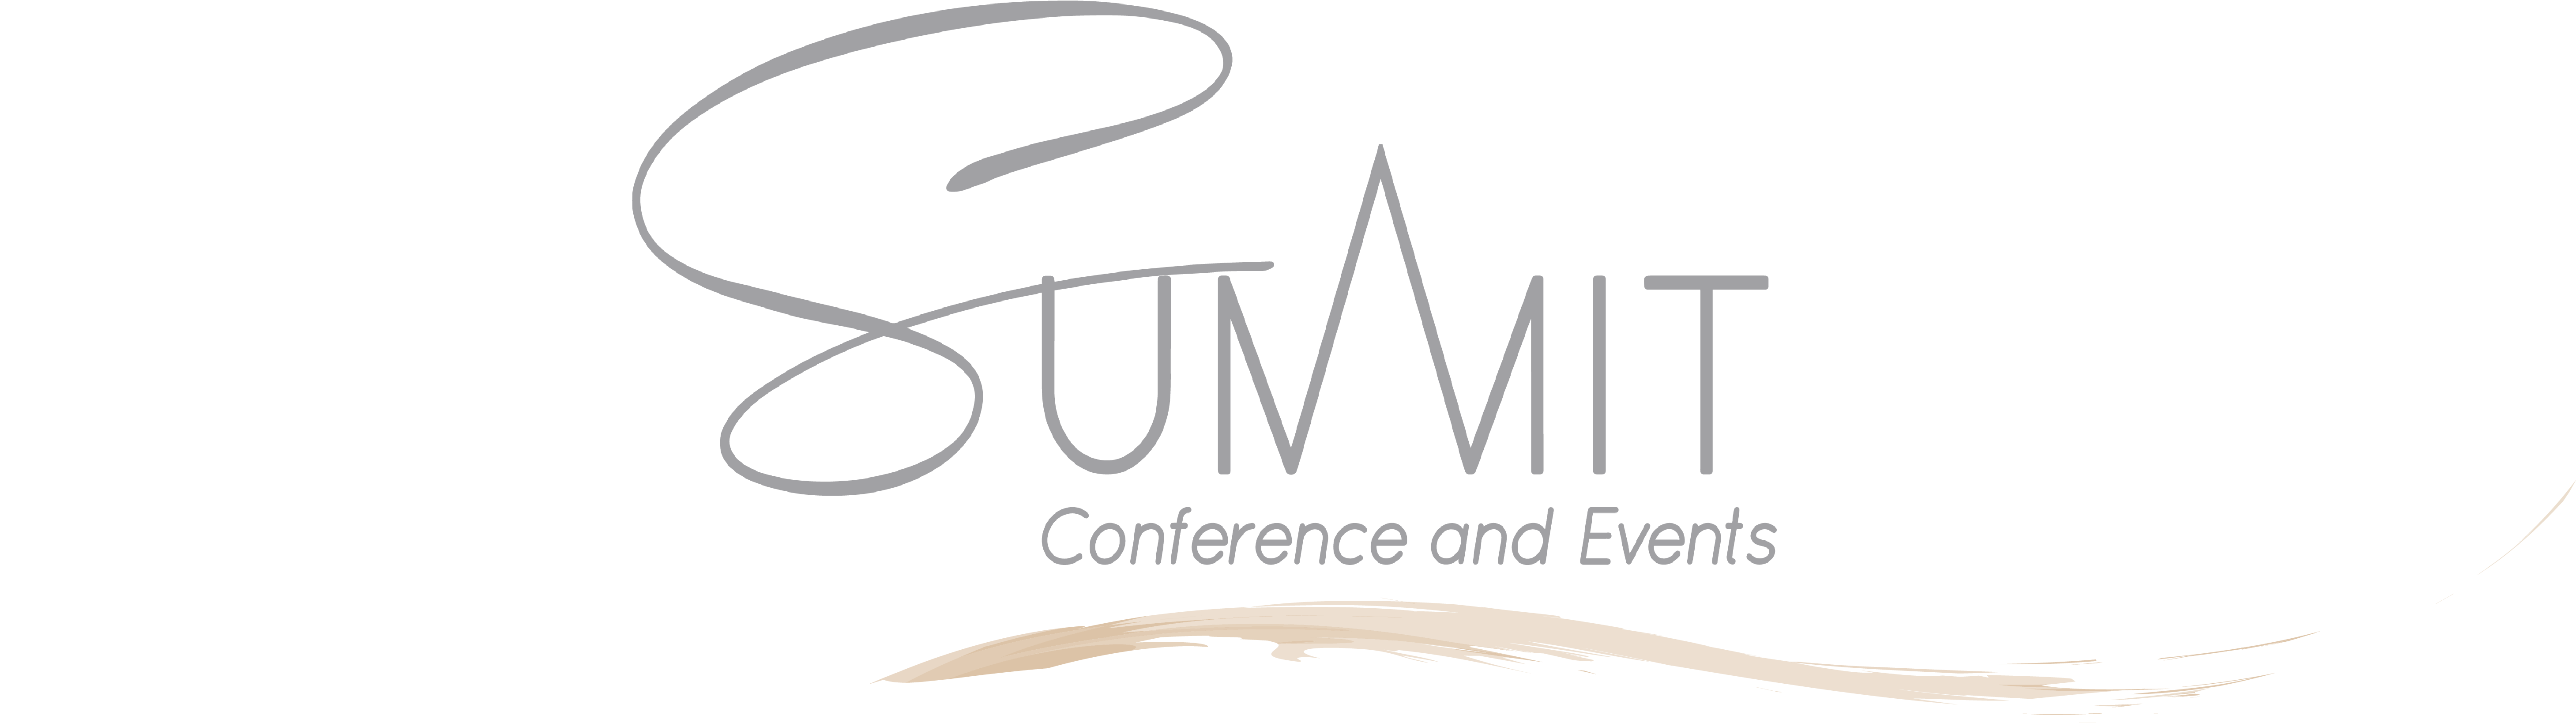 Summit Conference and Events